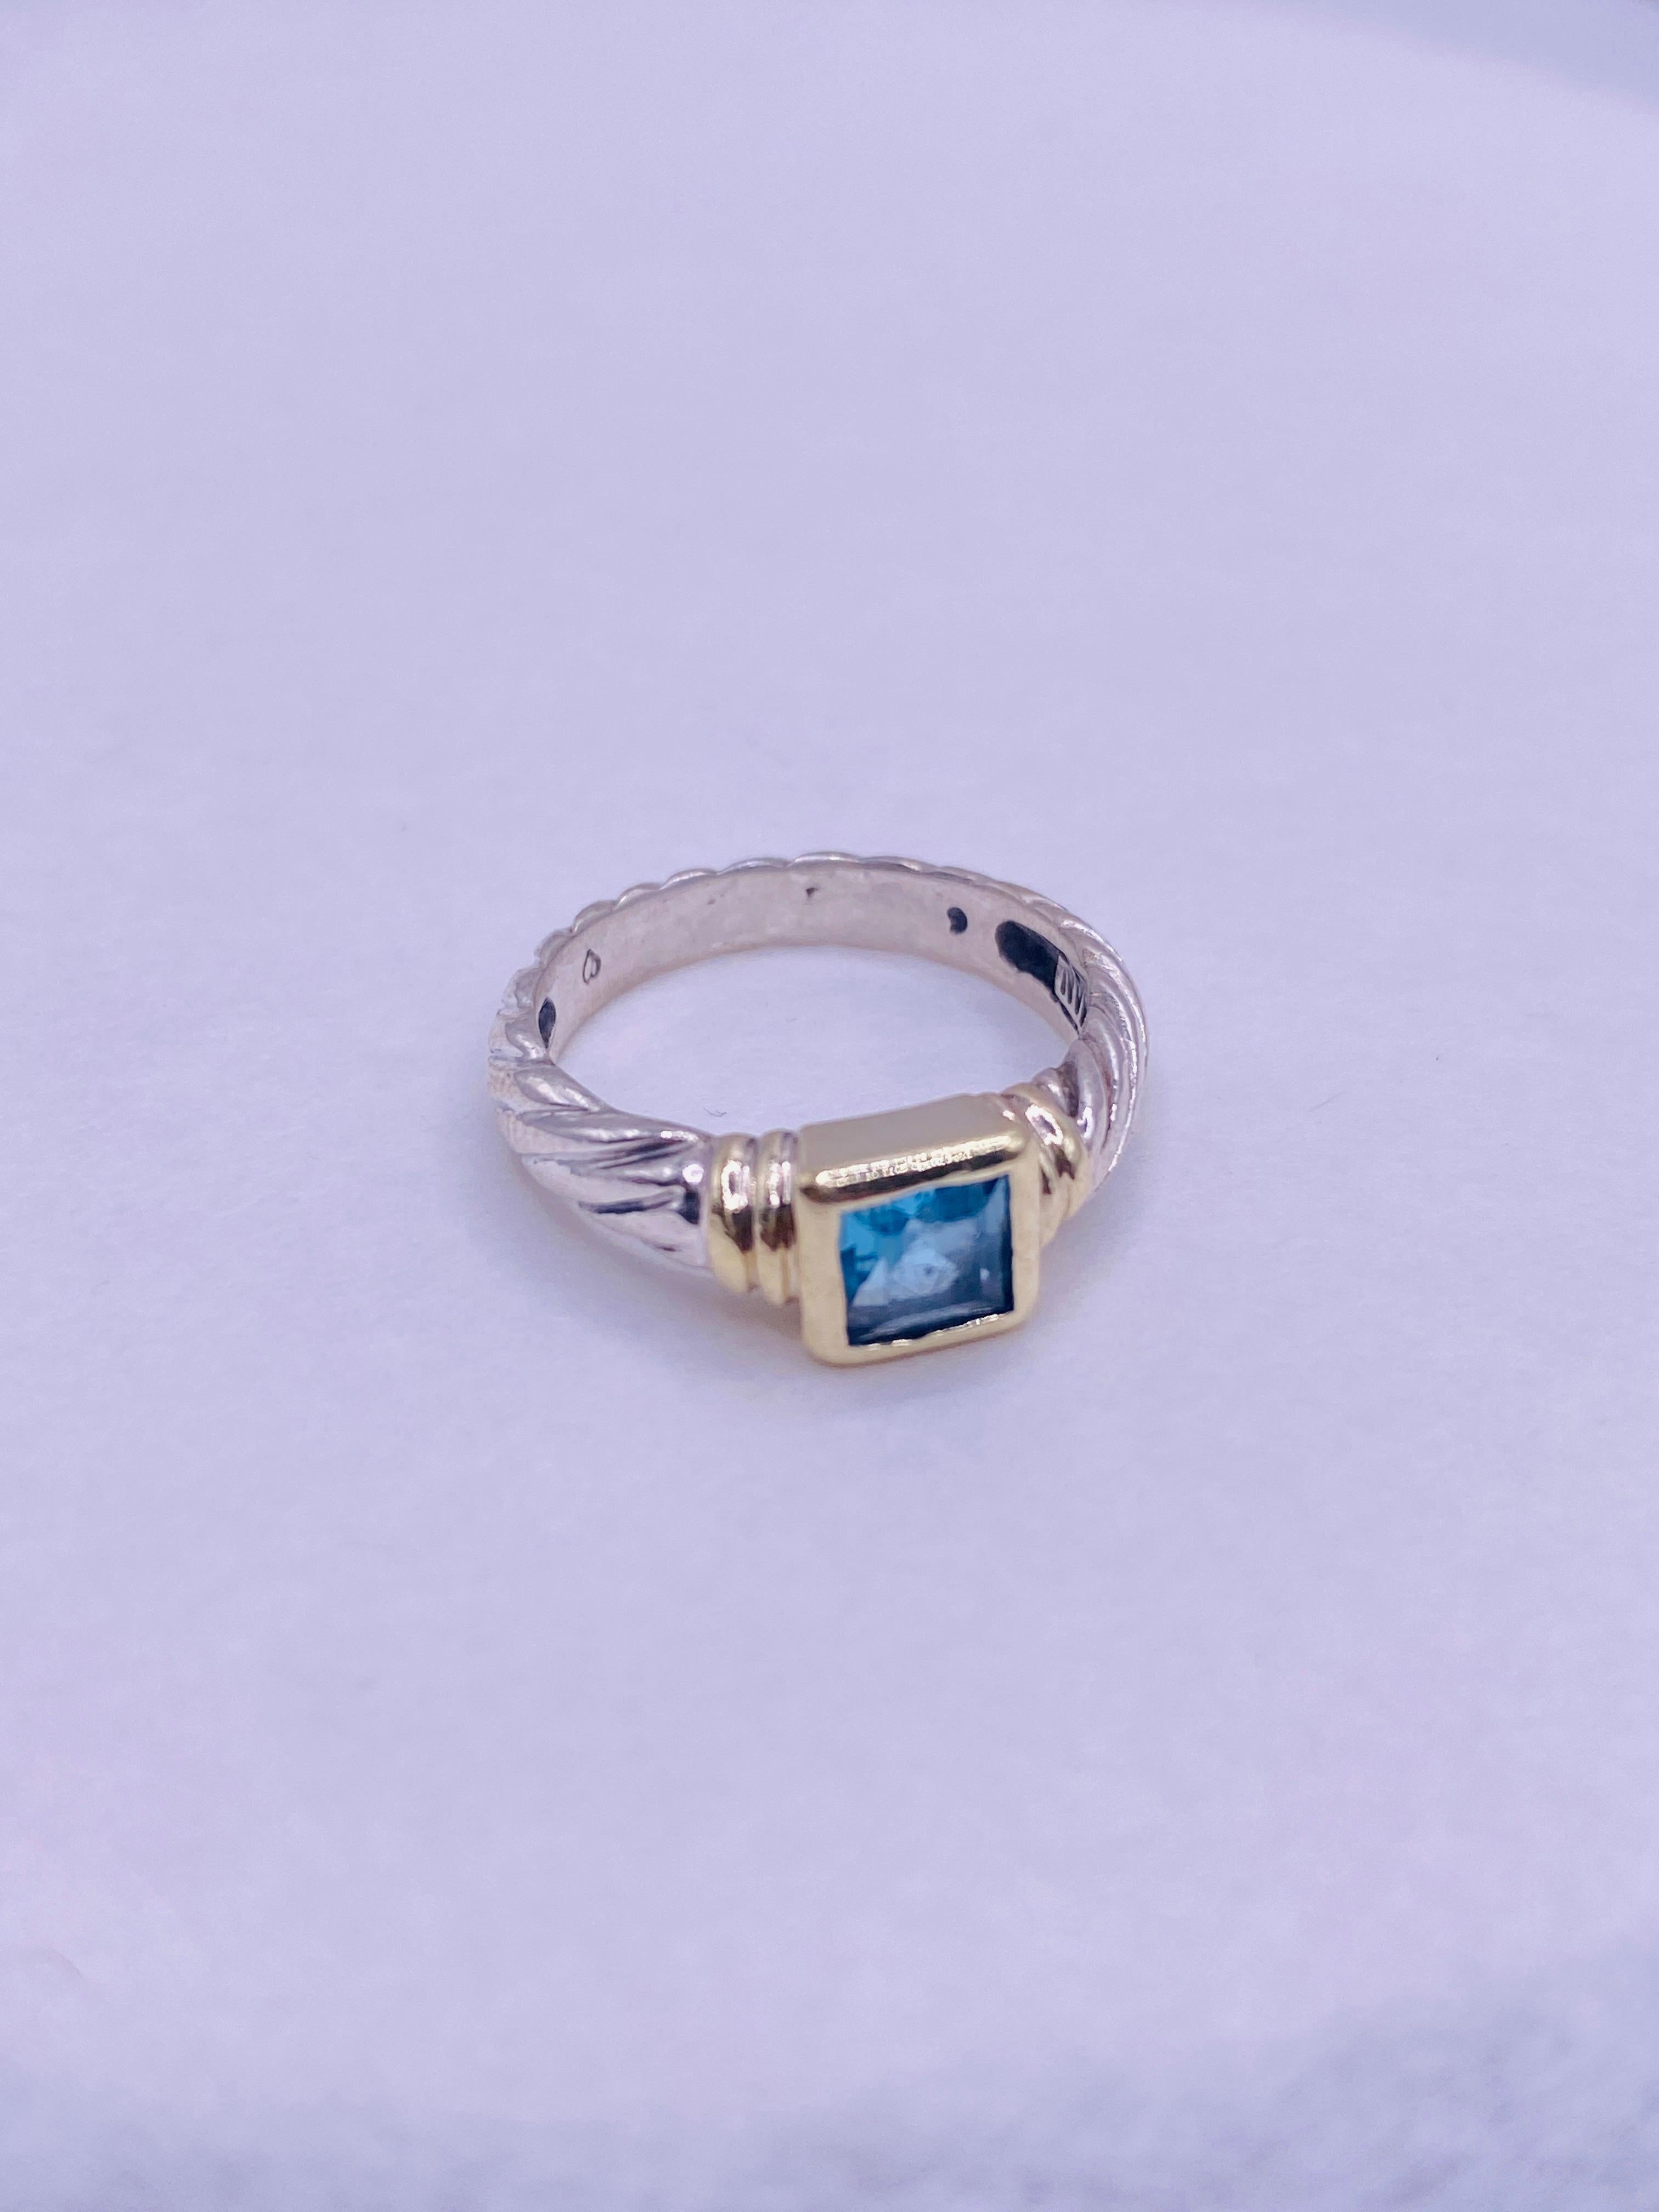 David Yurman Cable Collection 14k yellow gold sterling silver blue topaz ring. Size 6 US